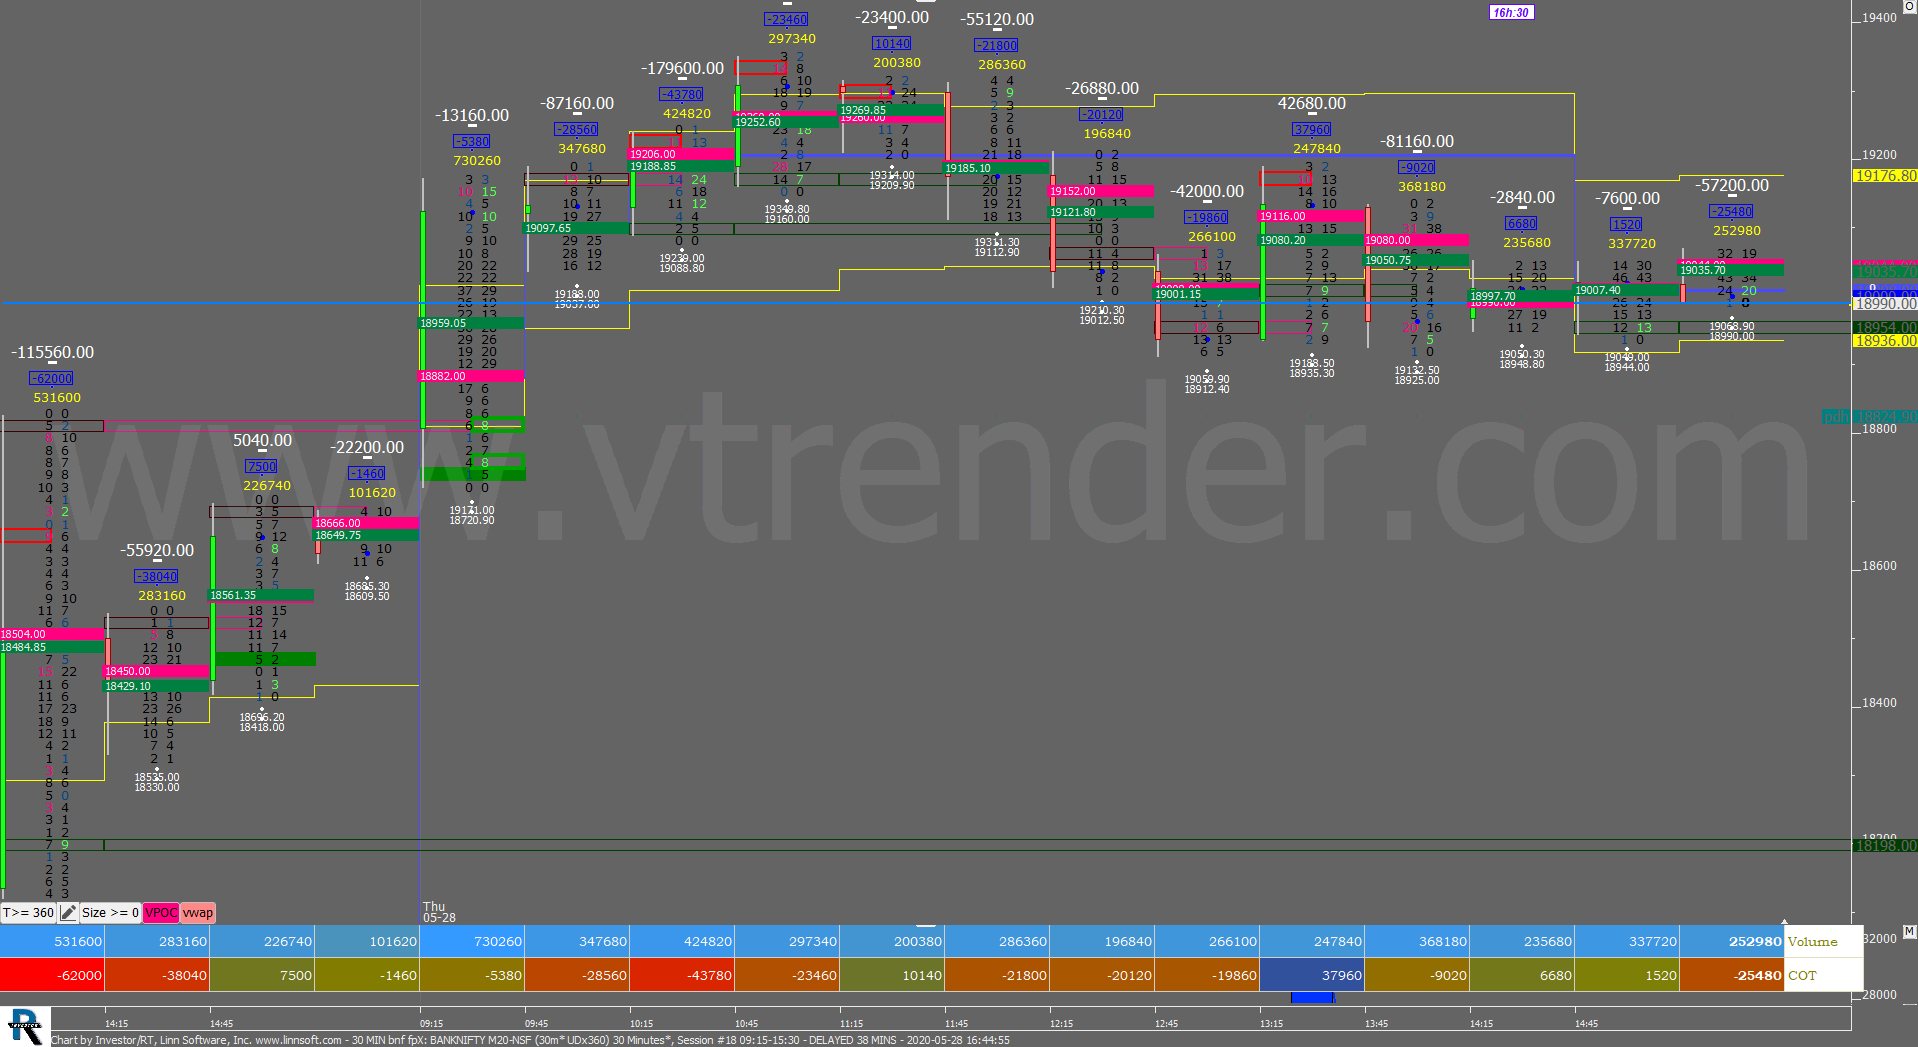 30 Min Bnf Fpx 17 Order Flow Charts Dated 28Th May 2020 Banknifty Futures, Day Trading, Intraday Trading, Intraday Trading Strategies, Nifty Futures, Order Flow Analysis, Support And Resistance, Trading Strategies, Volume Profile Trading